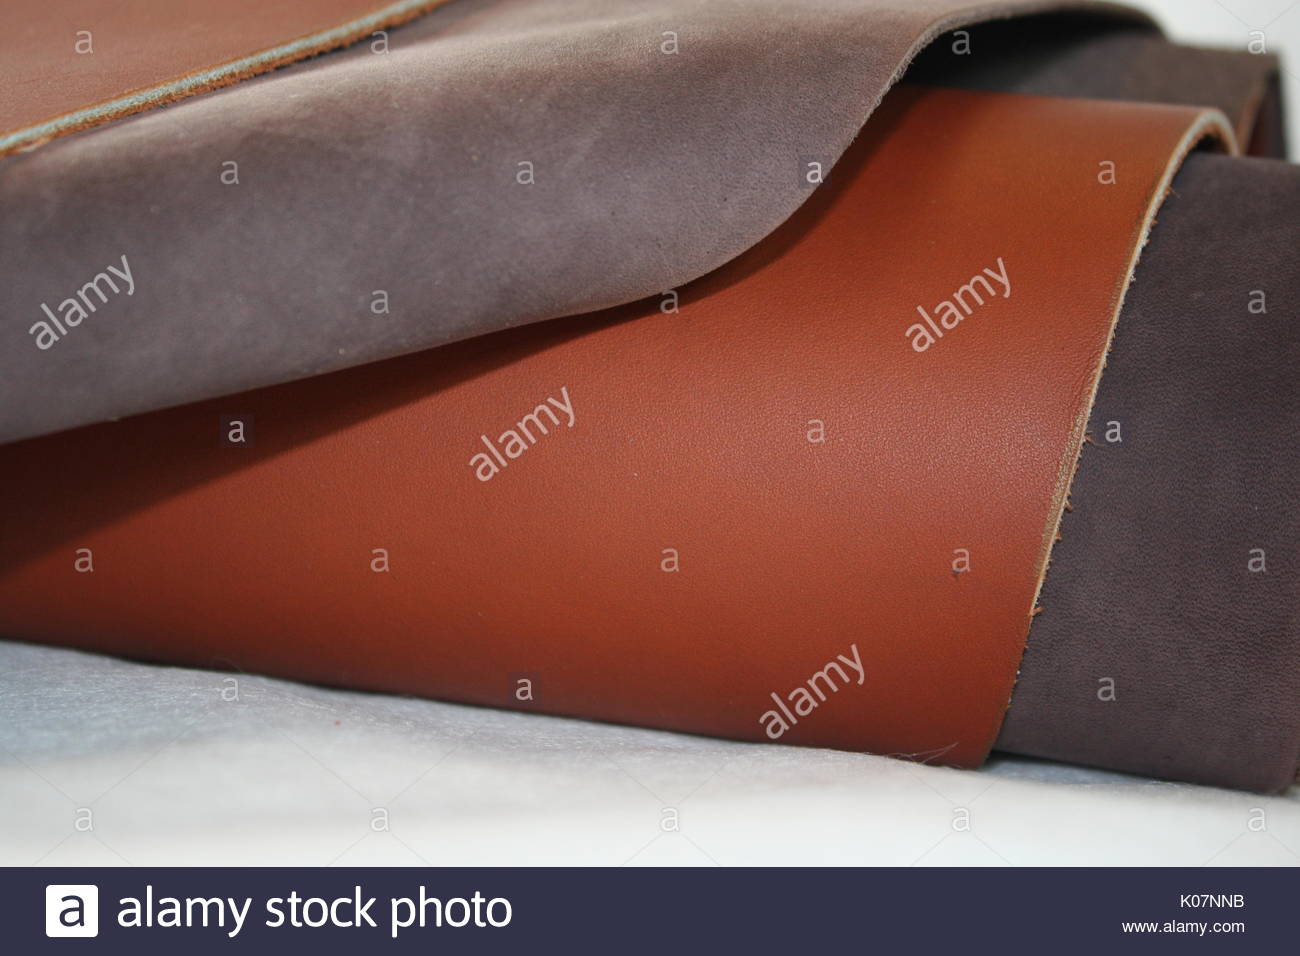 Raw Leather High Resolution Stock Photography and Images - Alamy